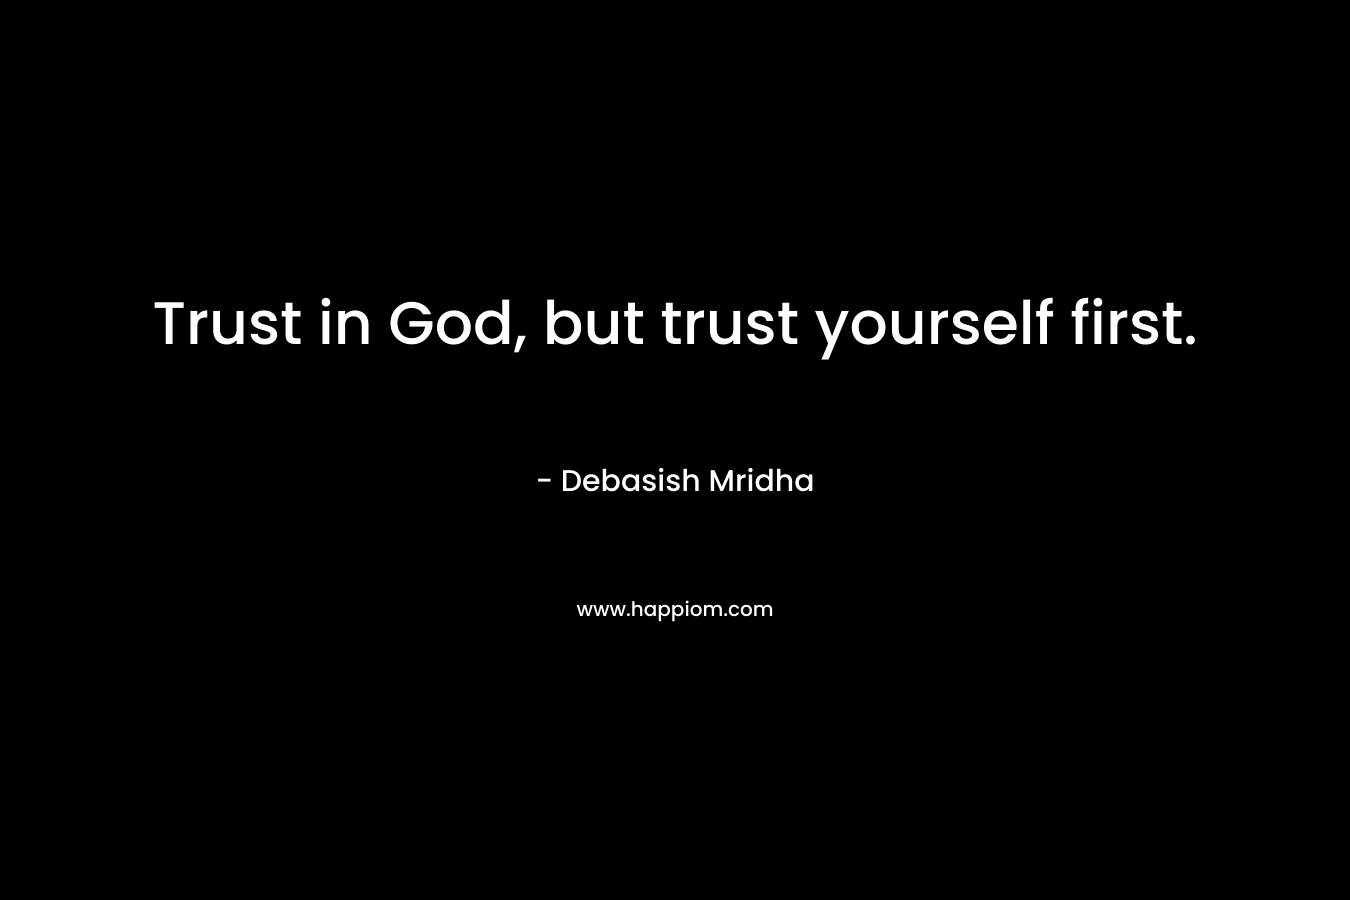 Trust in God, but trust yourself first.